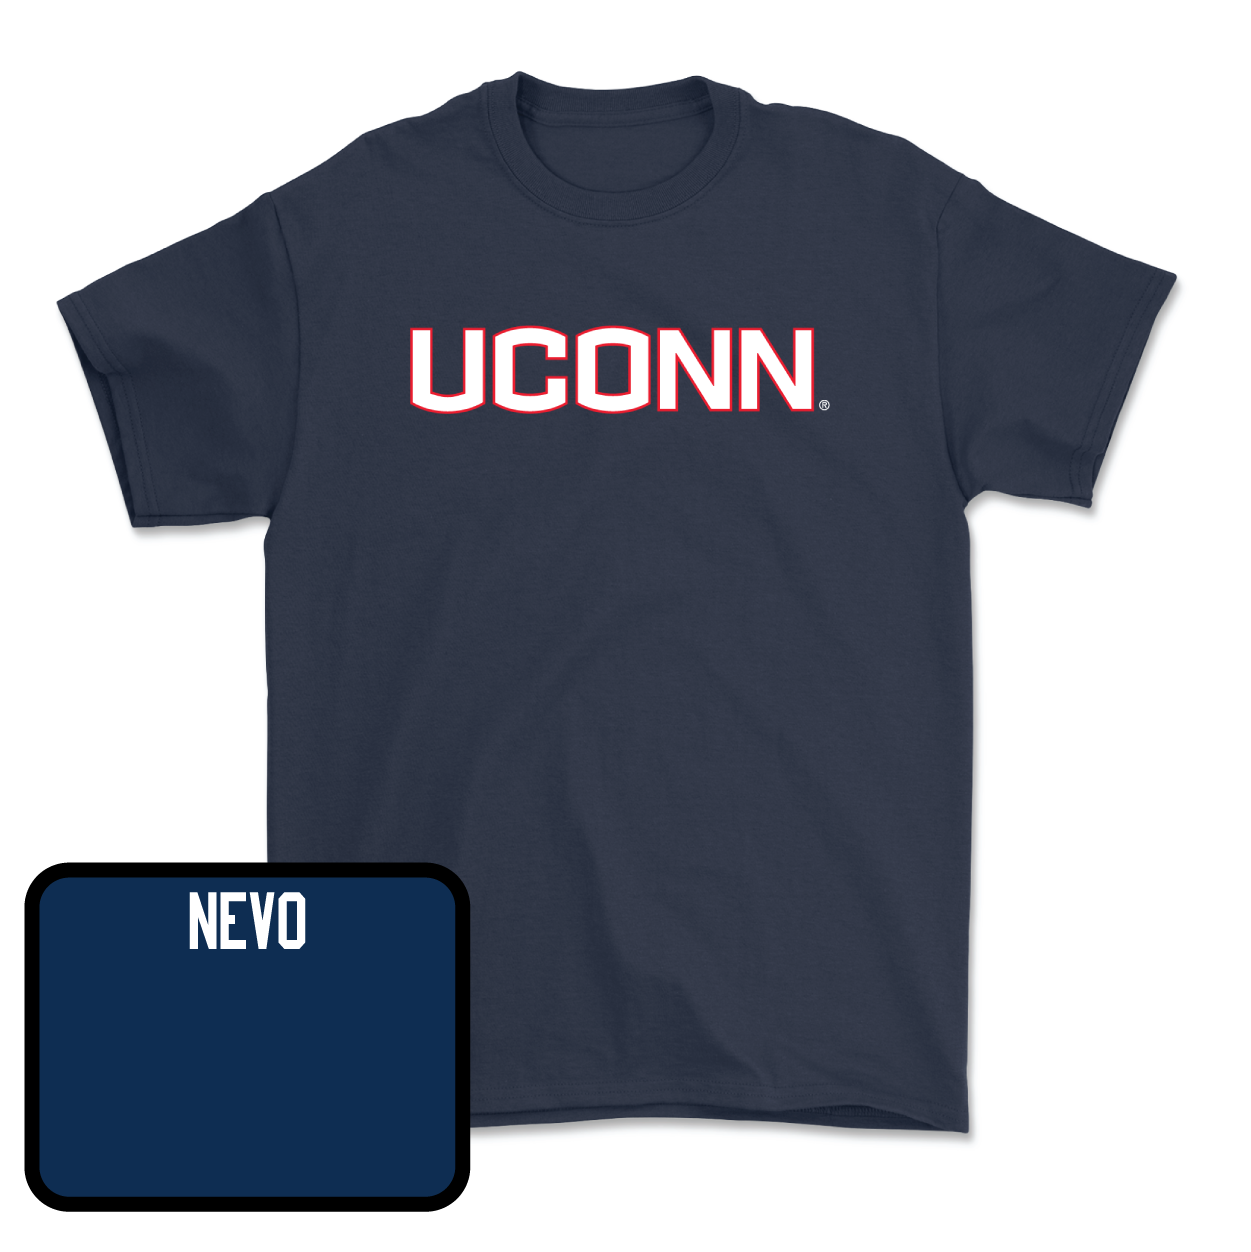 Navy Women's Rowing UConn Tee Youth Small / Liv Nevo